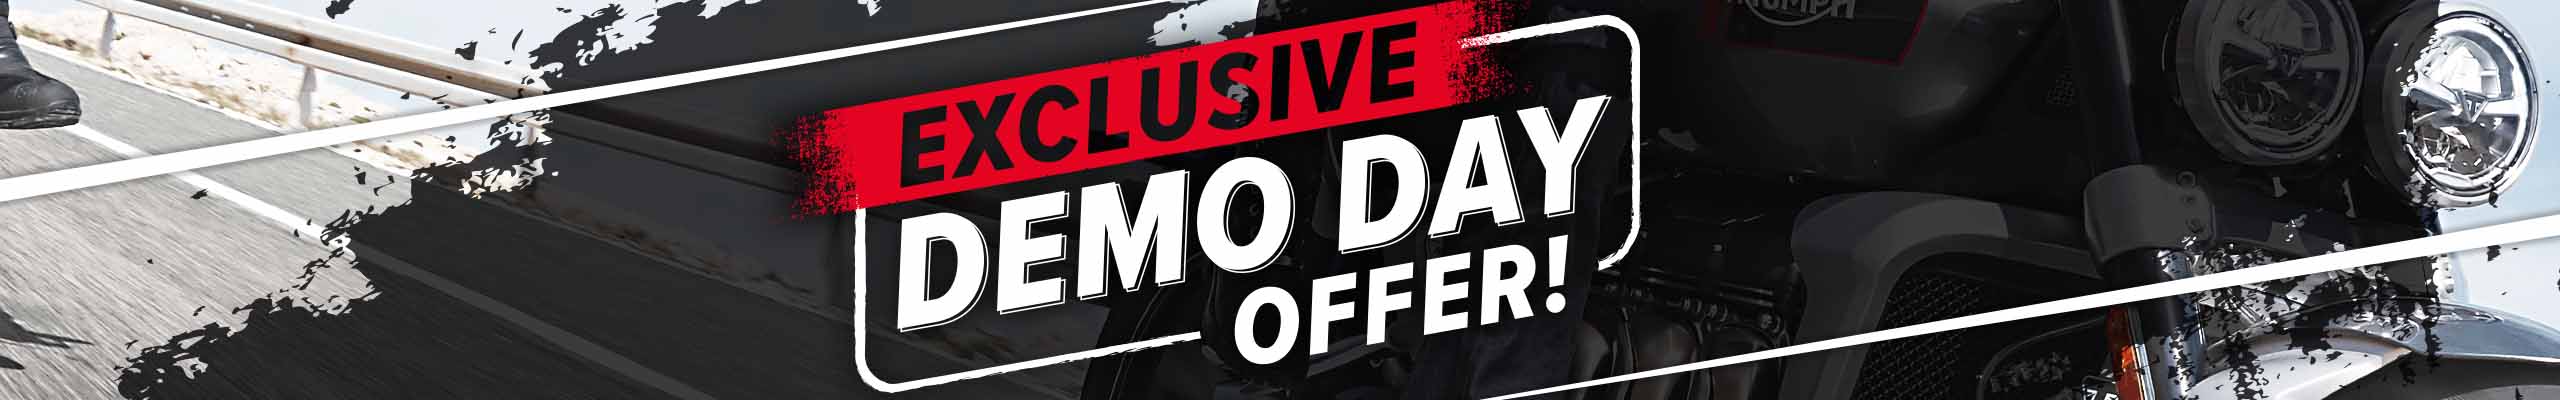 Laguna Motorcycles Demo Day Offers